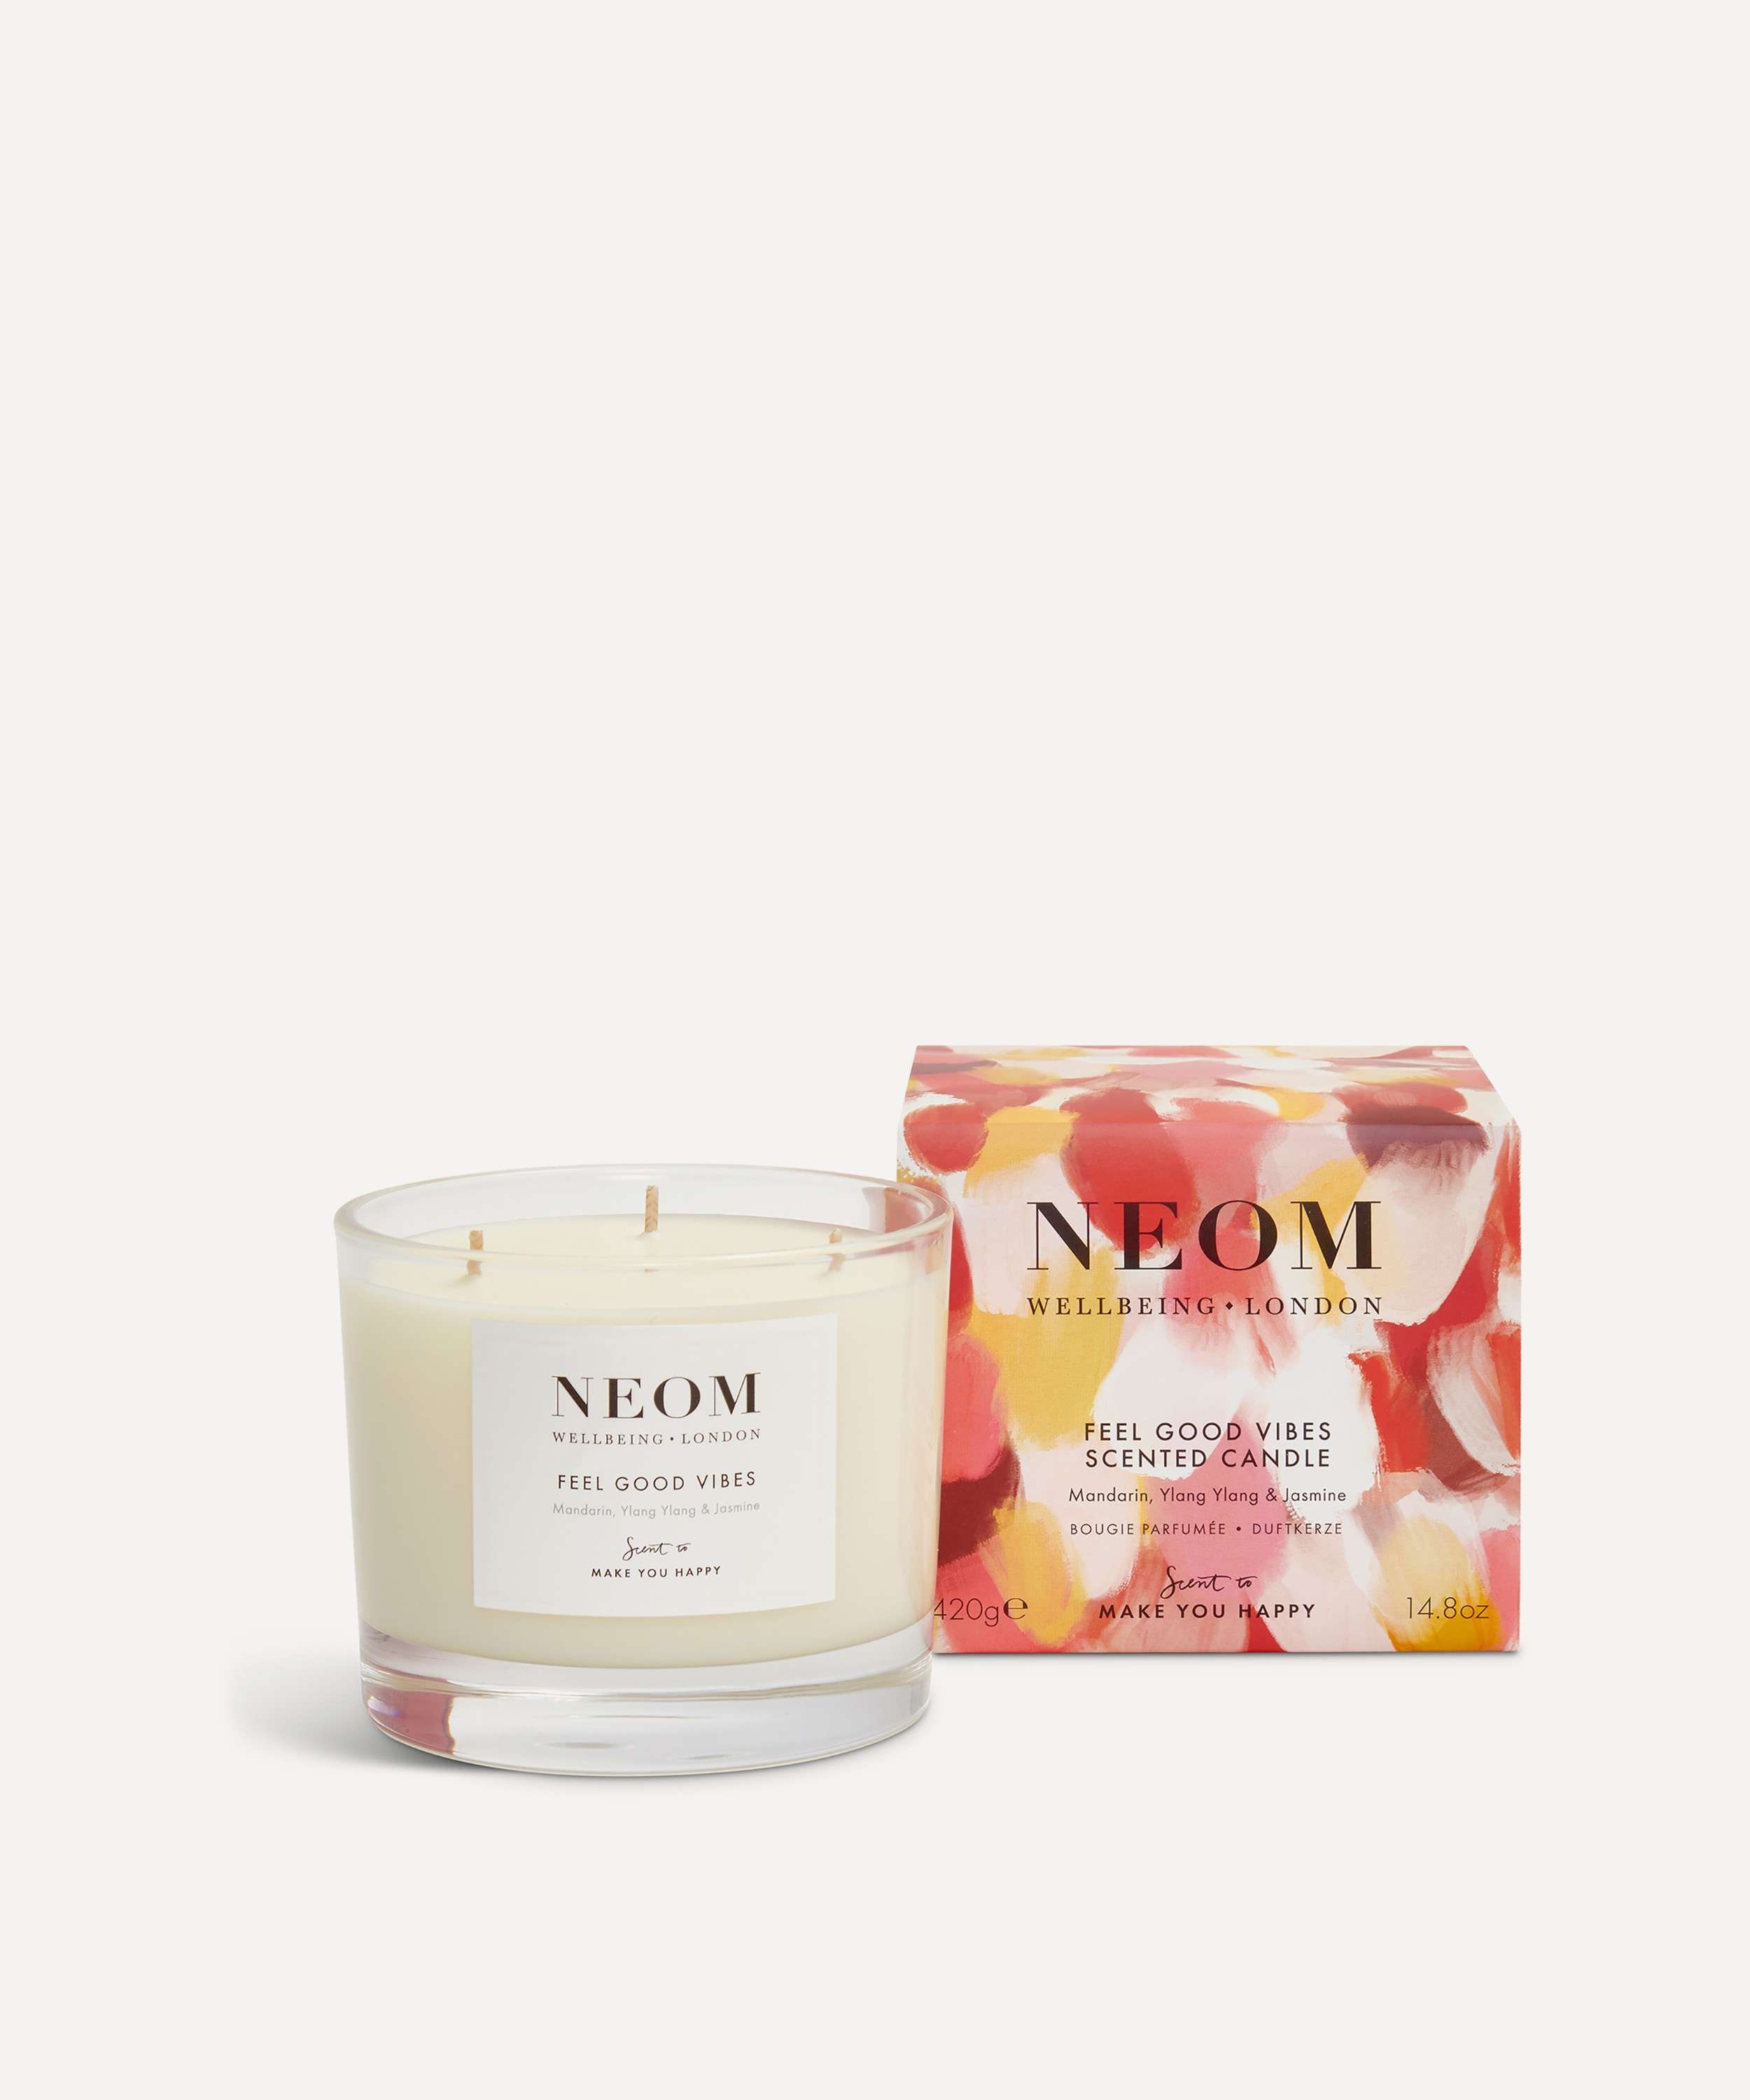 NEOM Organics - Feel Good Vibes Limited Edition 3 Wick Candle 420g